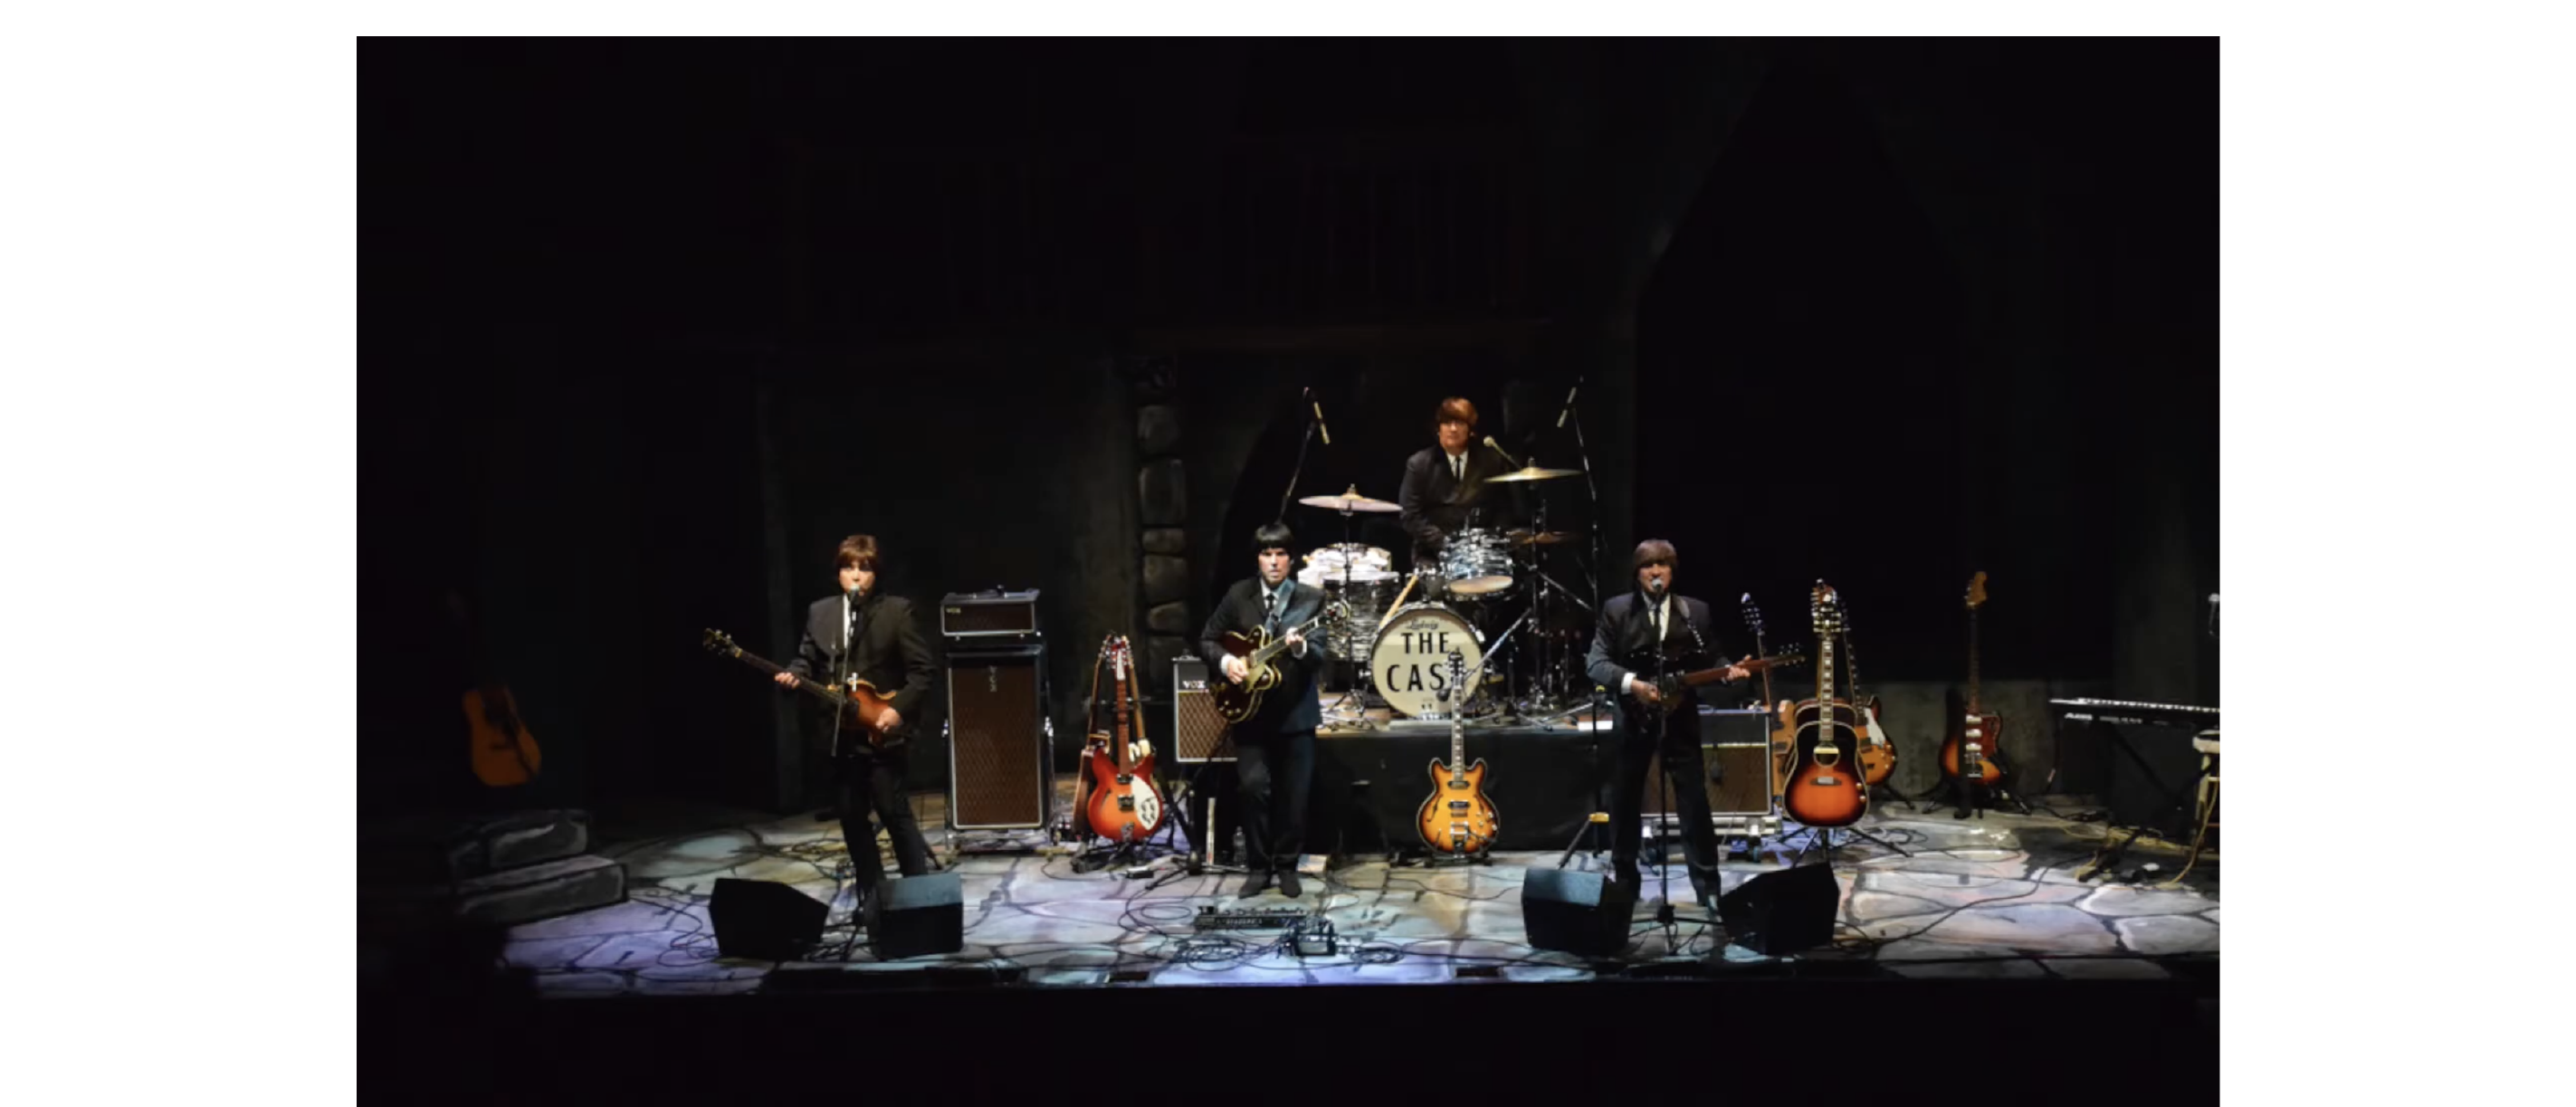 THE CAST OF BEATLEMANIA performing on stage.